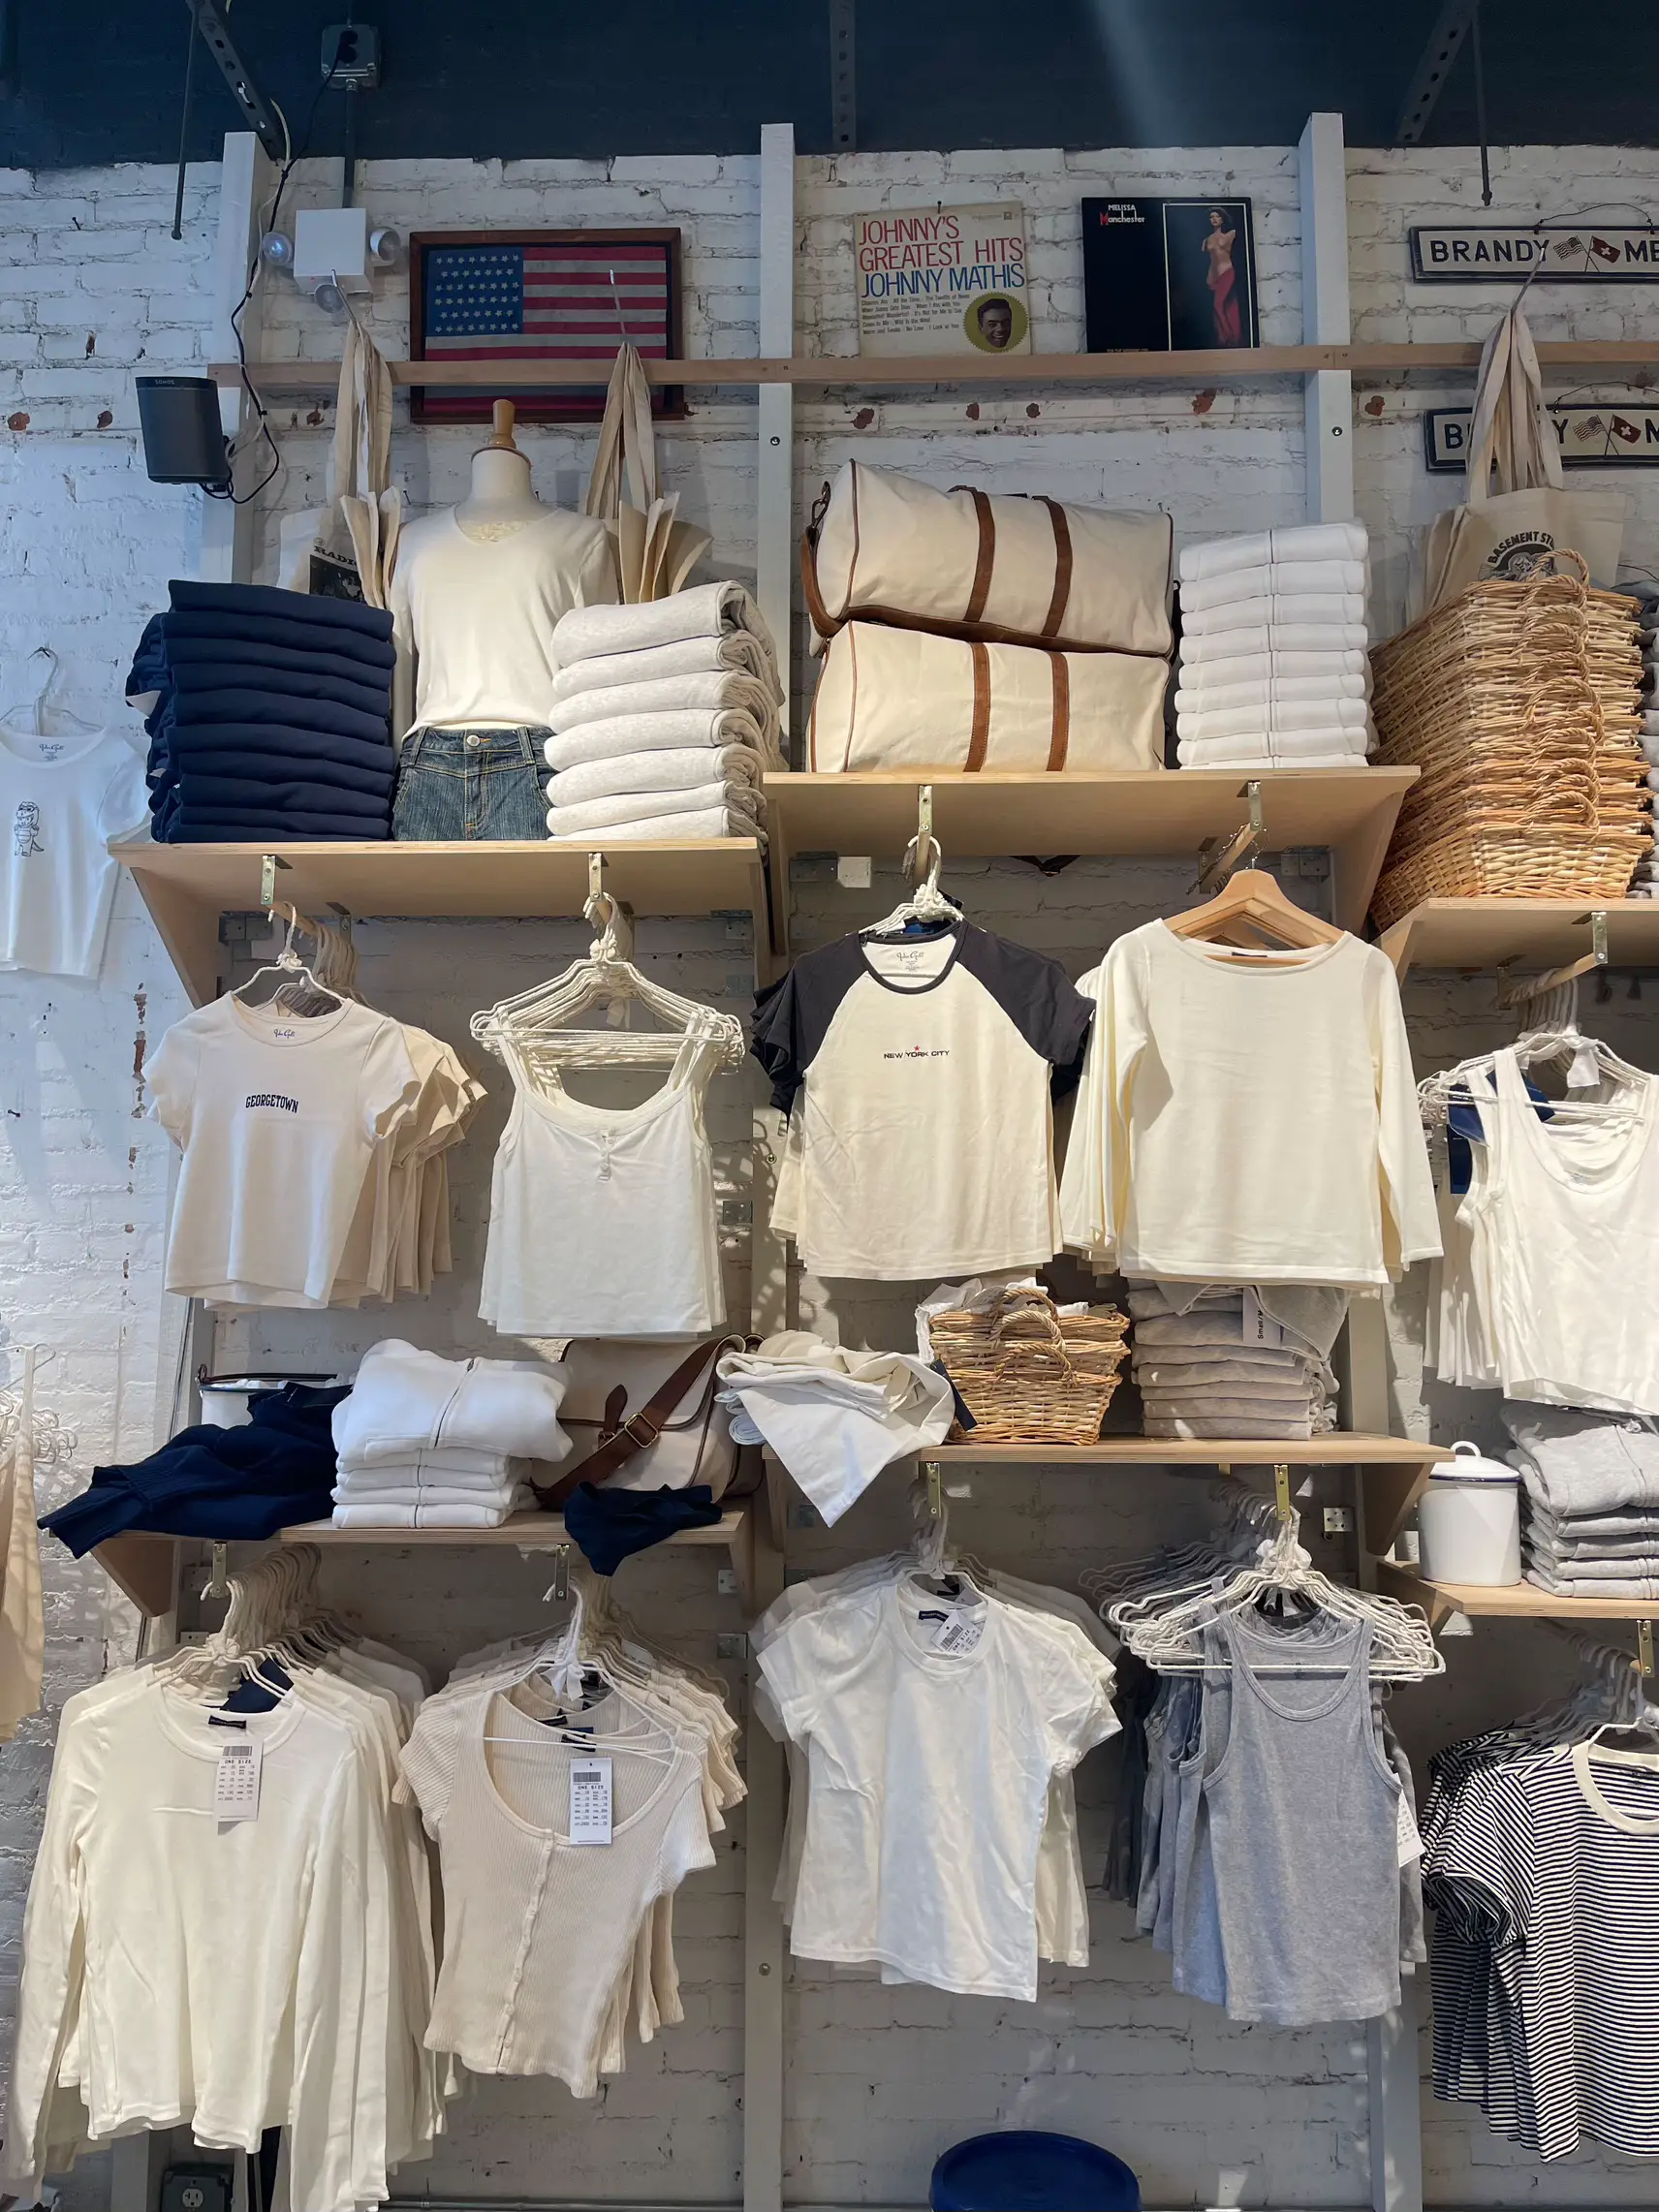 COME WITH ME [Series]: Brandy Melville Soho, Gallery posted by bellapawita